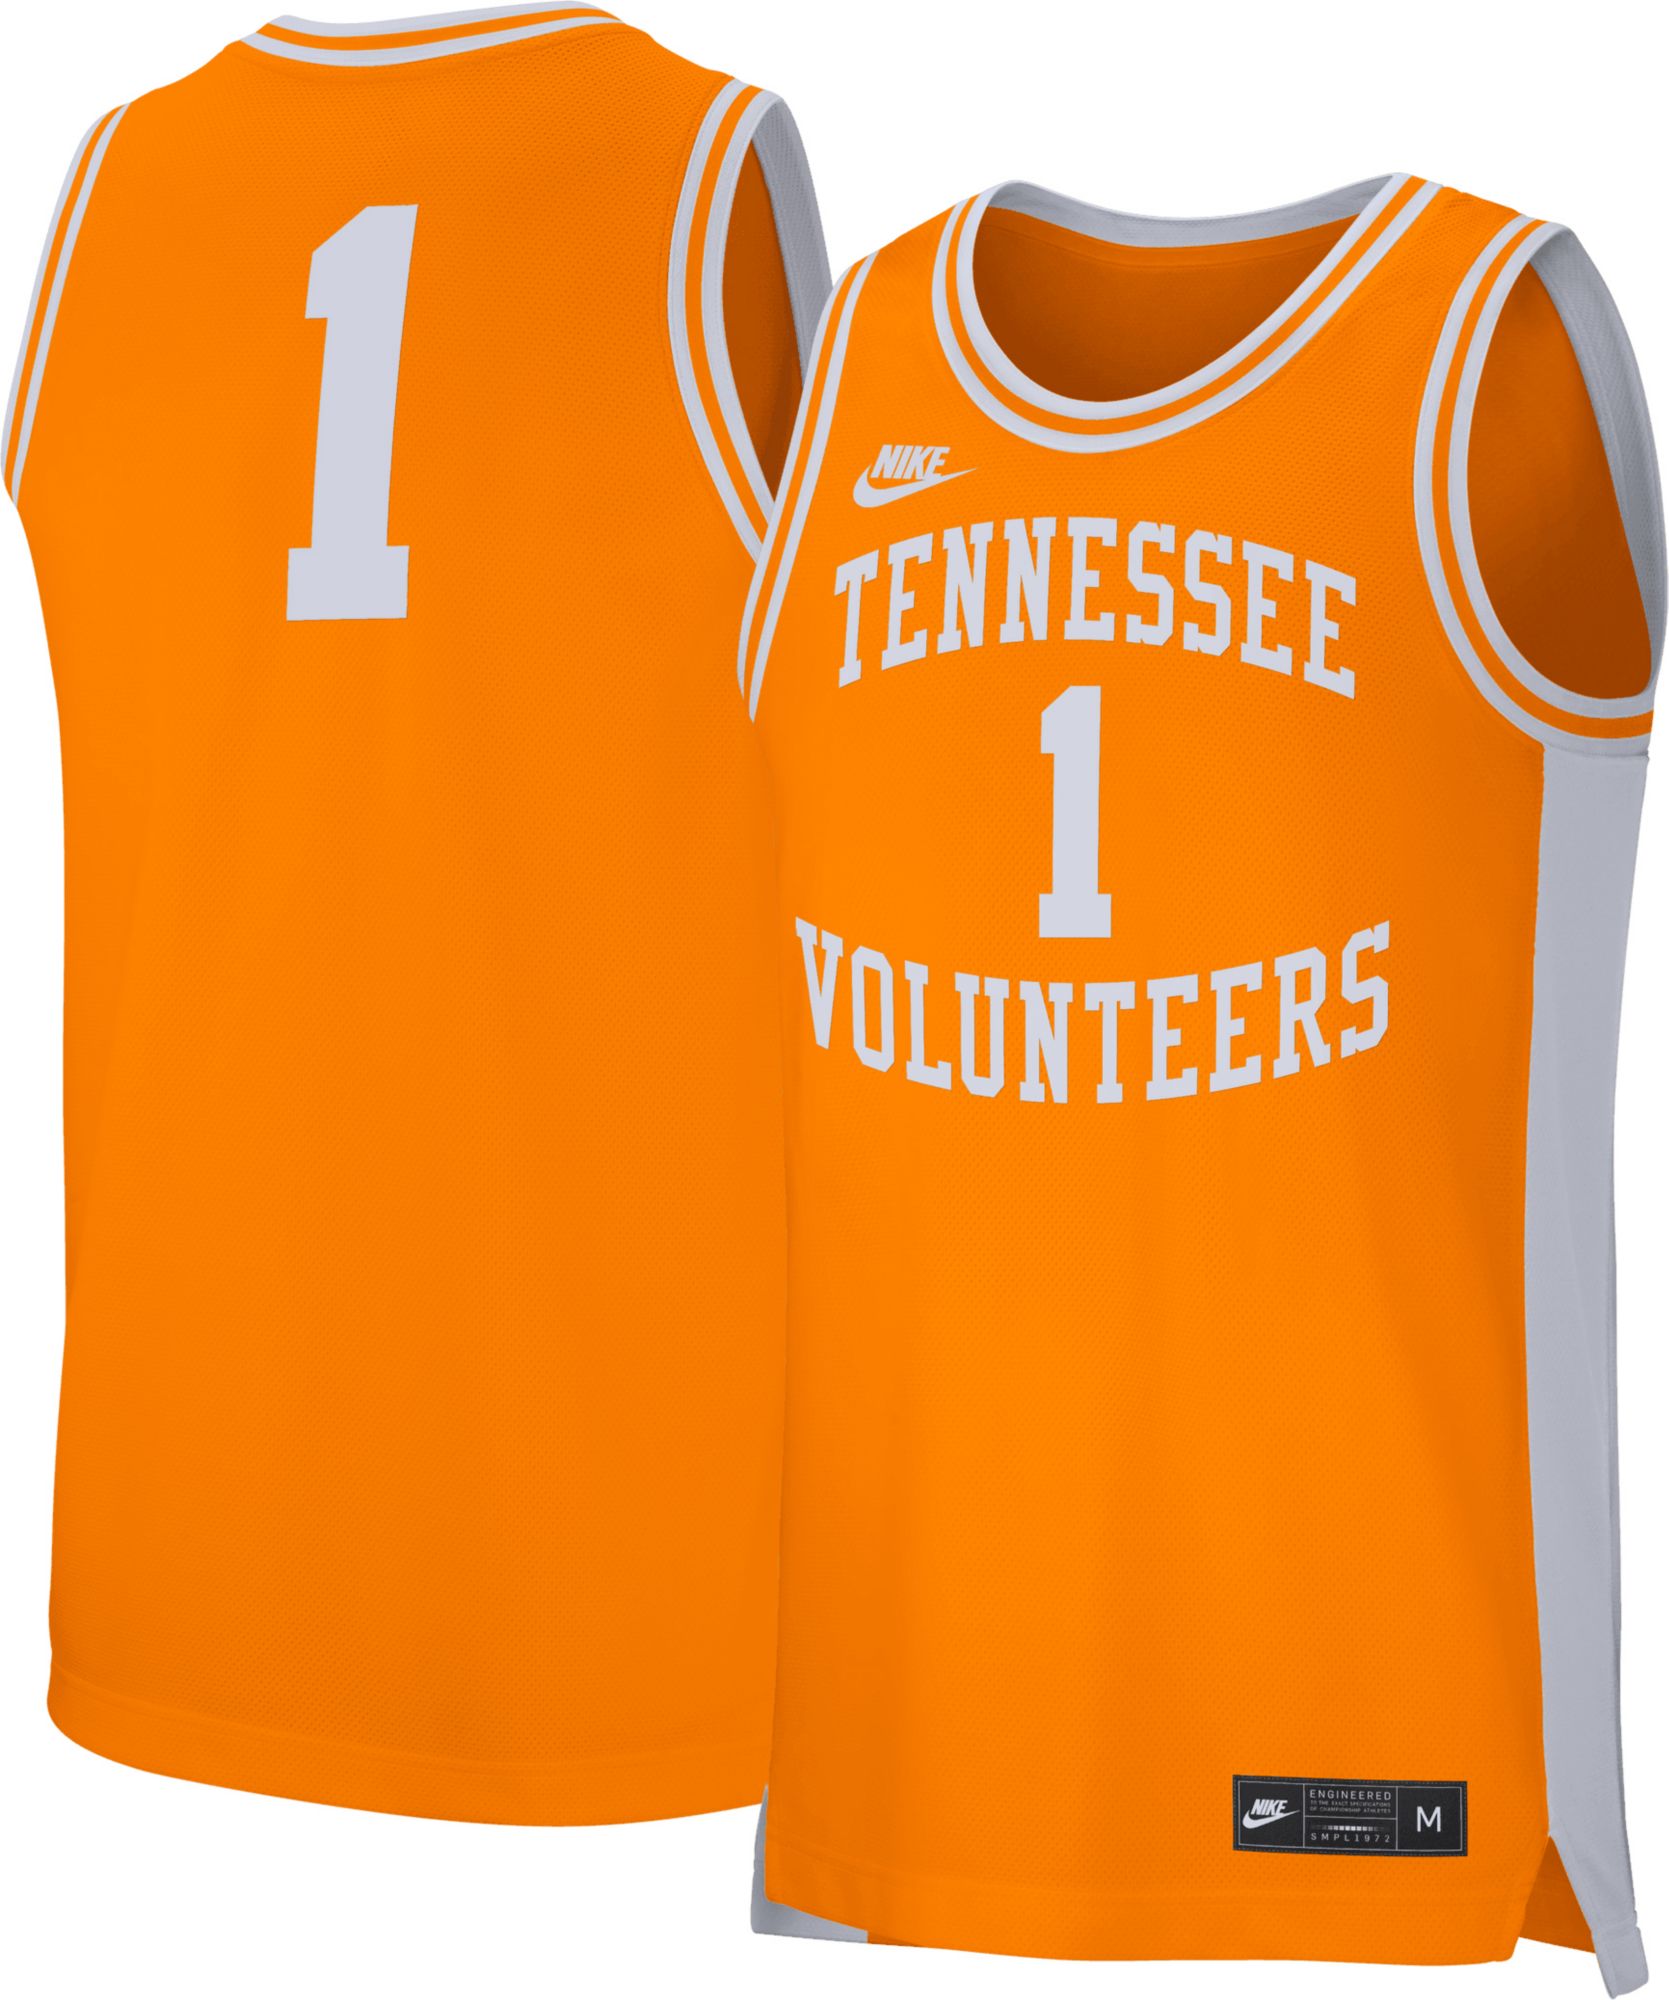 Tennessee Volunteers white jersey